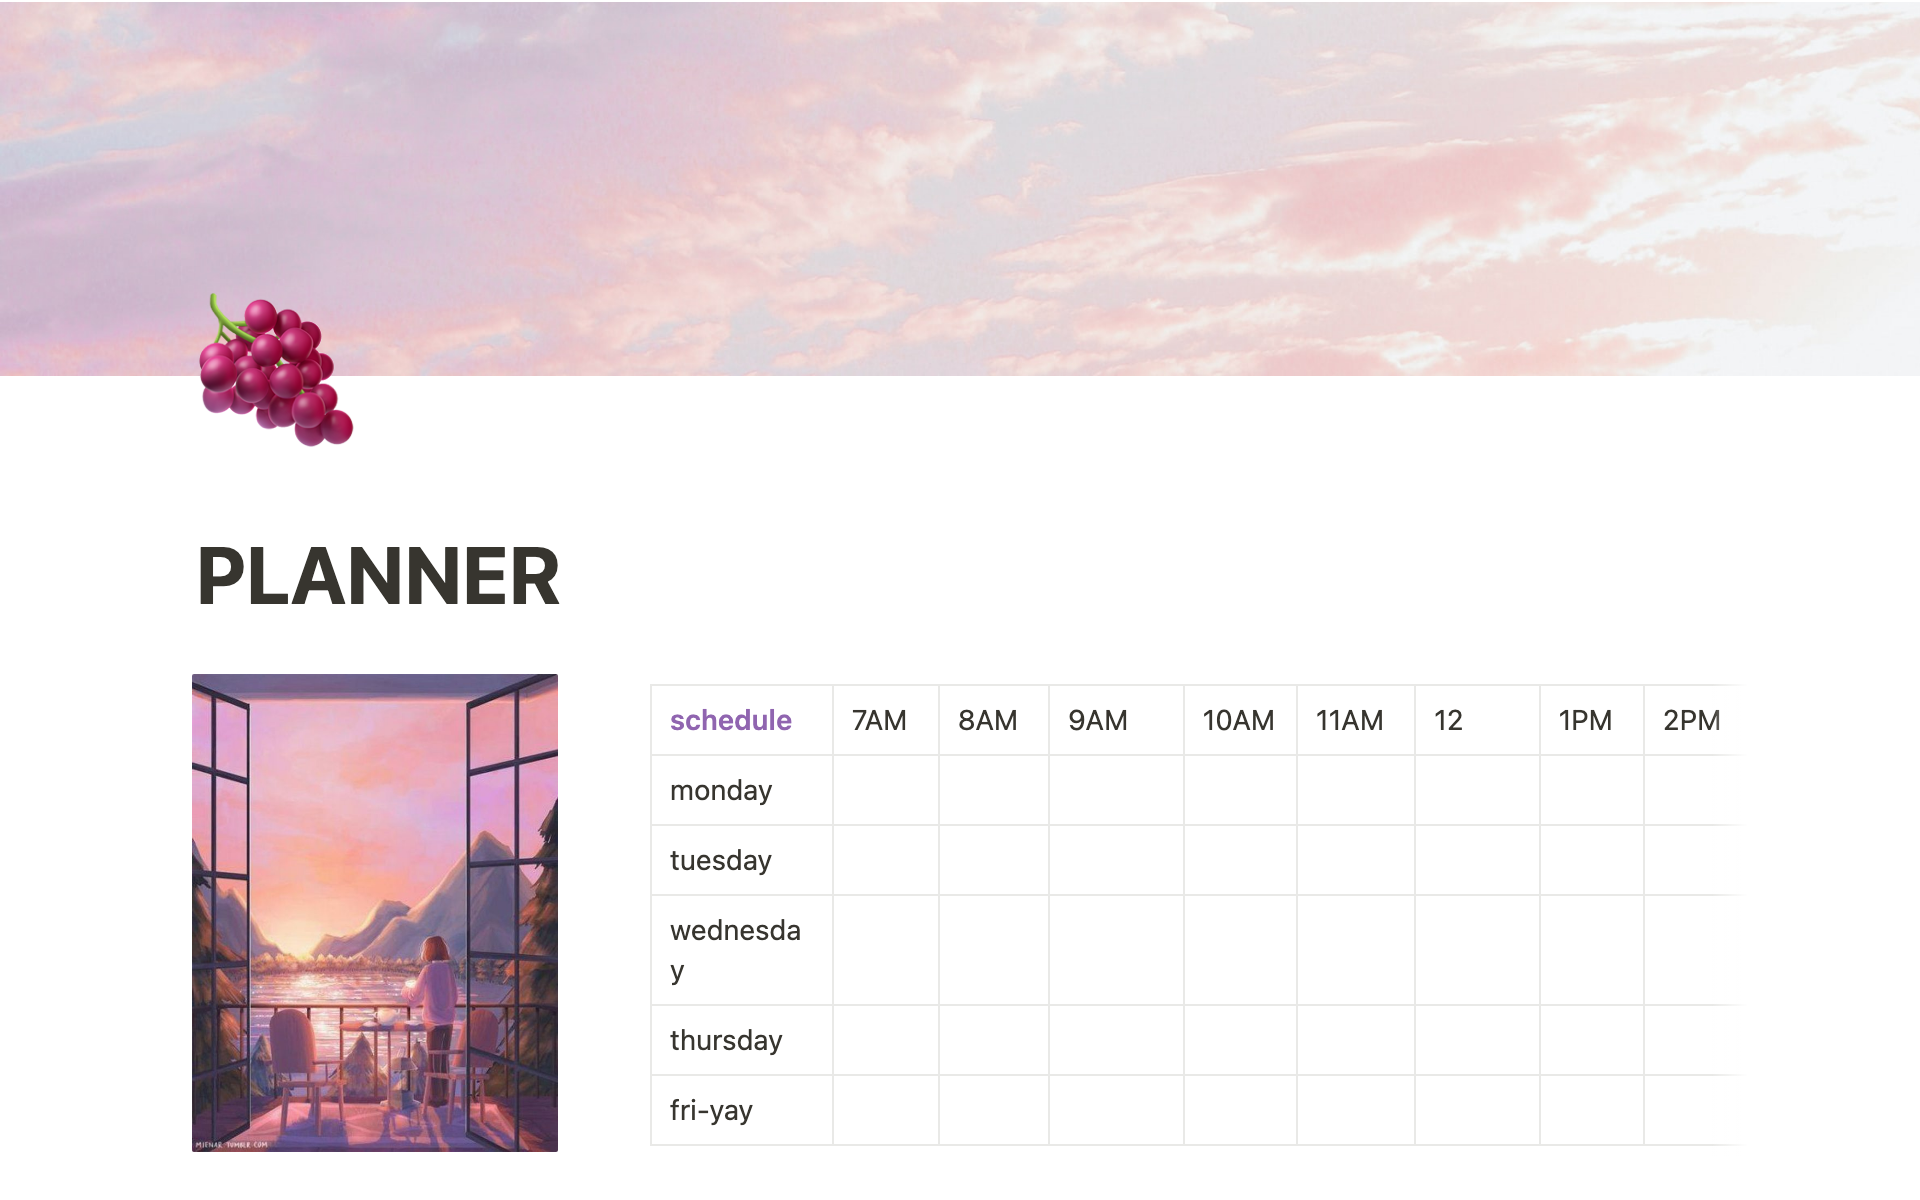 A template preview for Daily planner